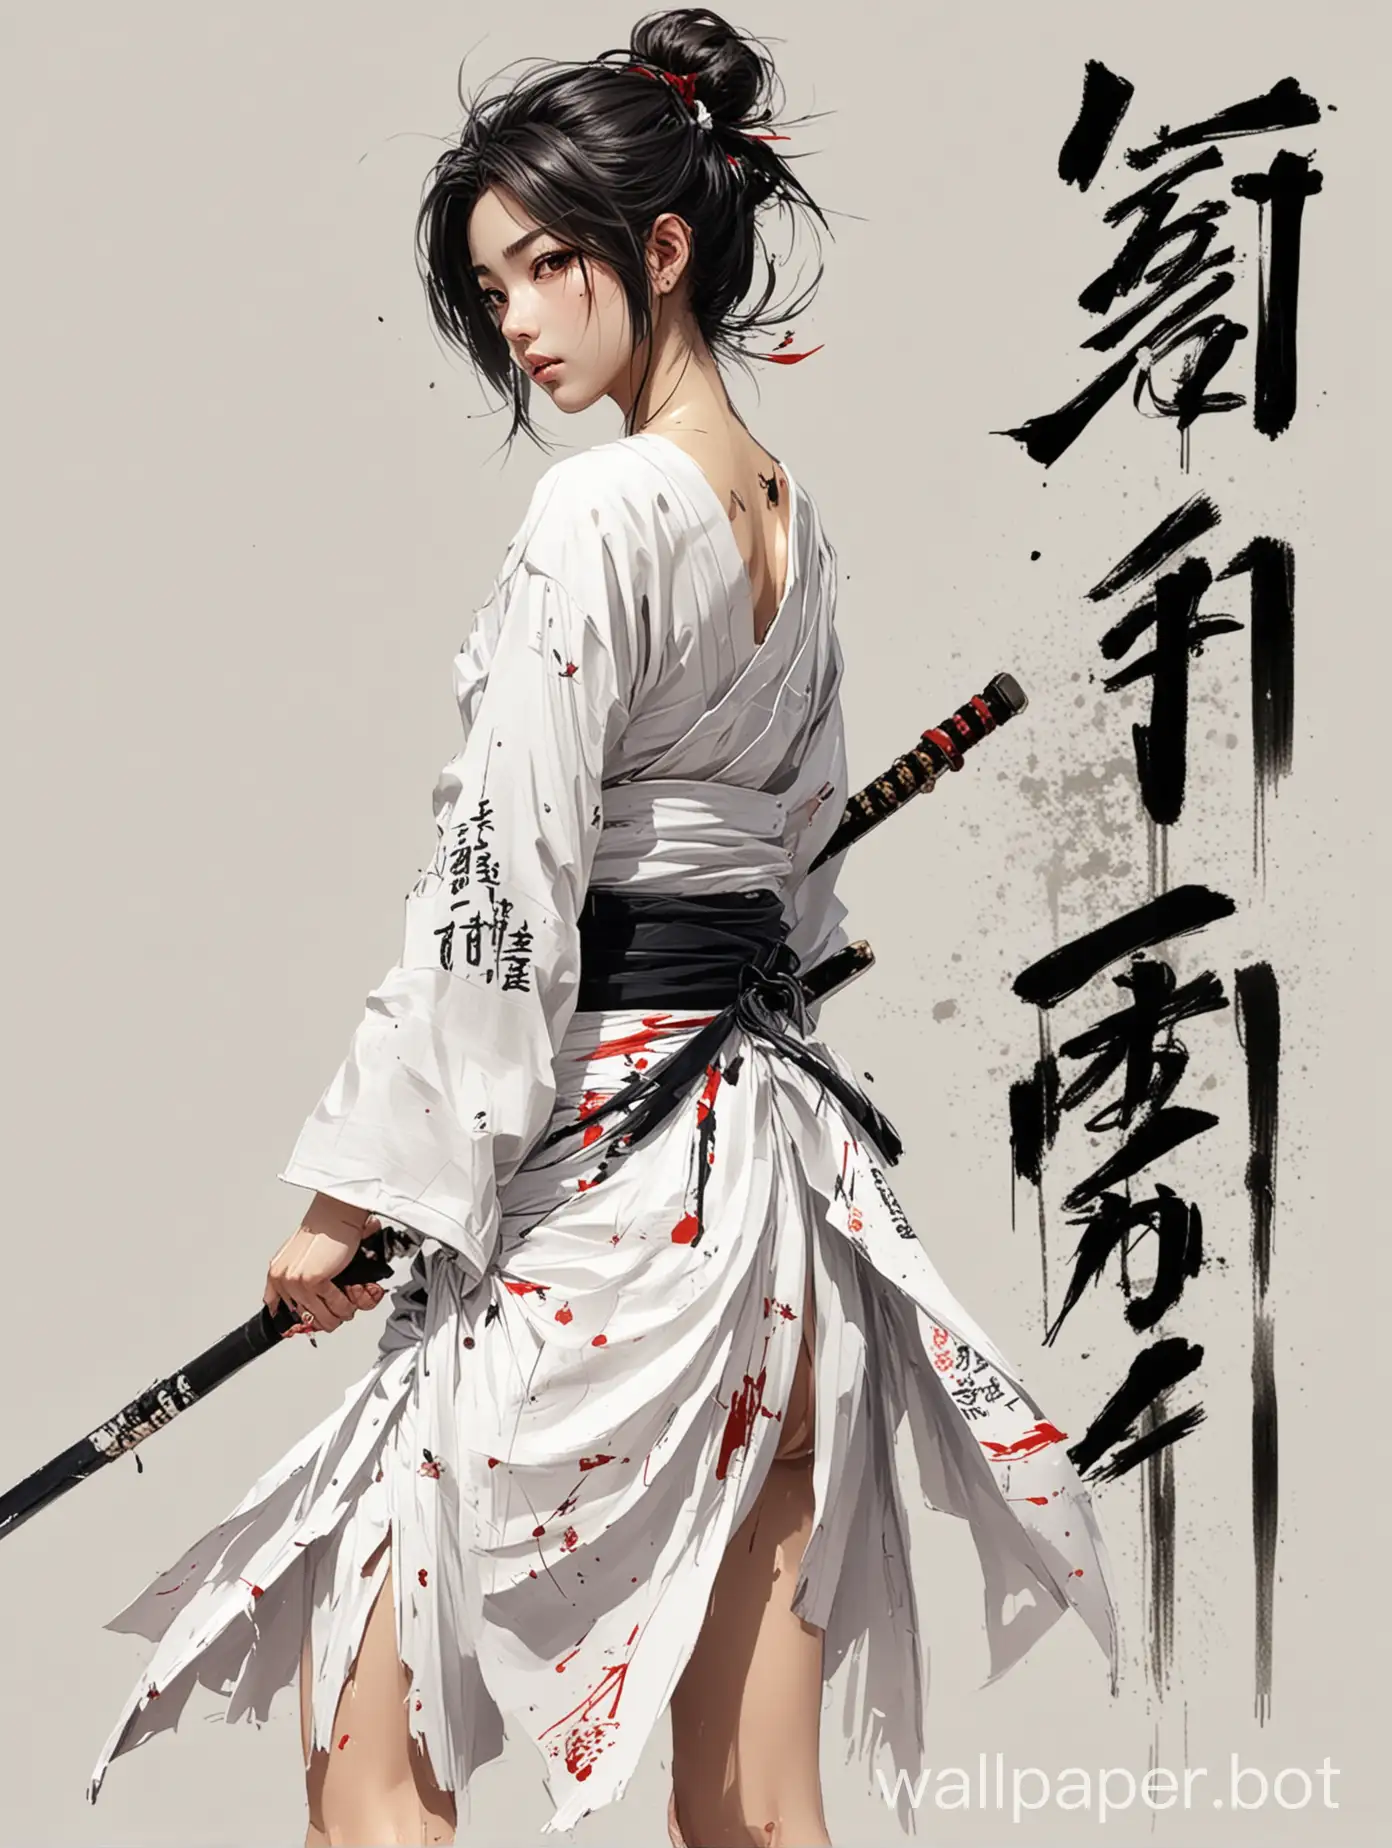 cool japan girl, white dress, white background,Turn your body to the left, anime In the story,samurai,Sketching styles, japan words in front,,a few black strokes with a brush behind the body,Broken brushstrokes,look follow body,wallpaper for 2 monitors